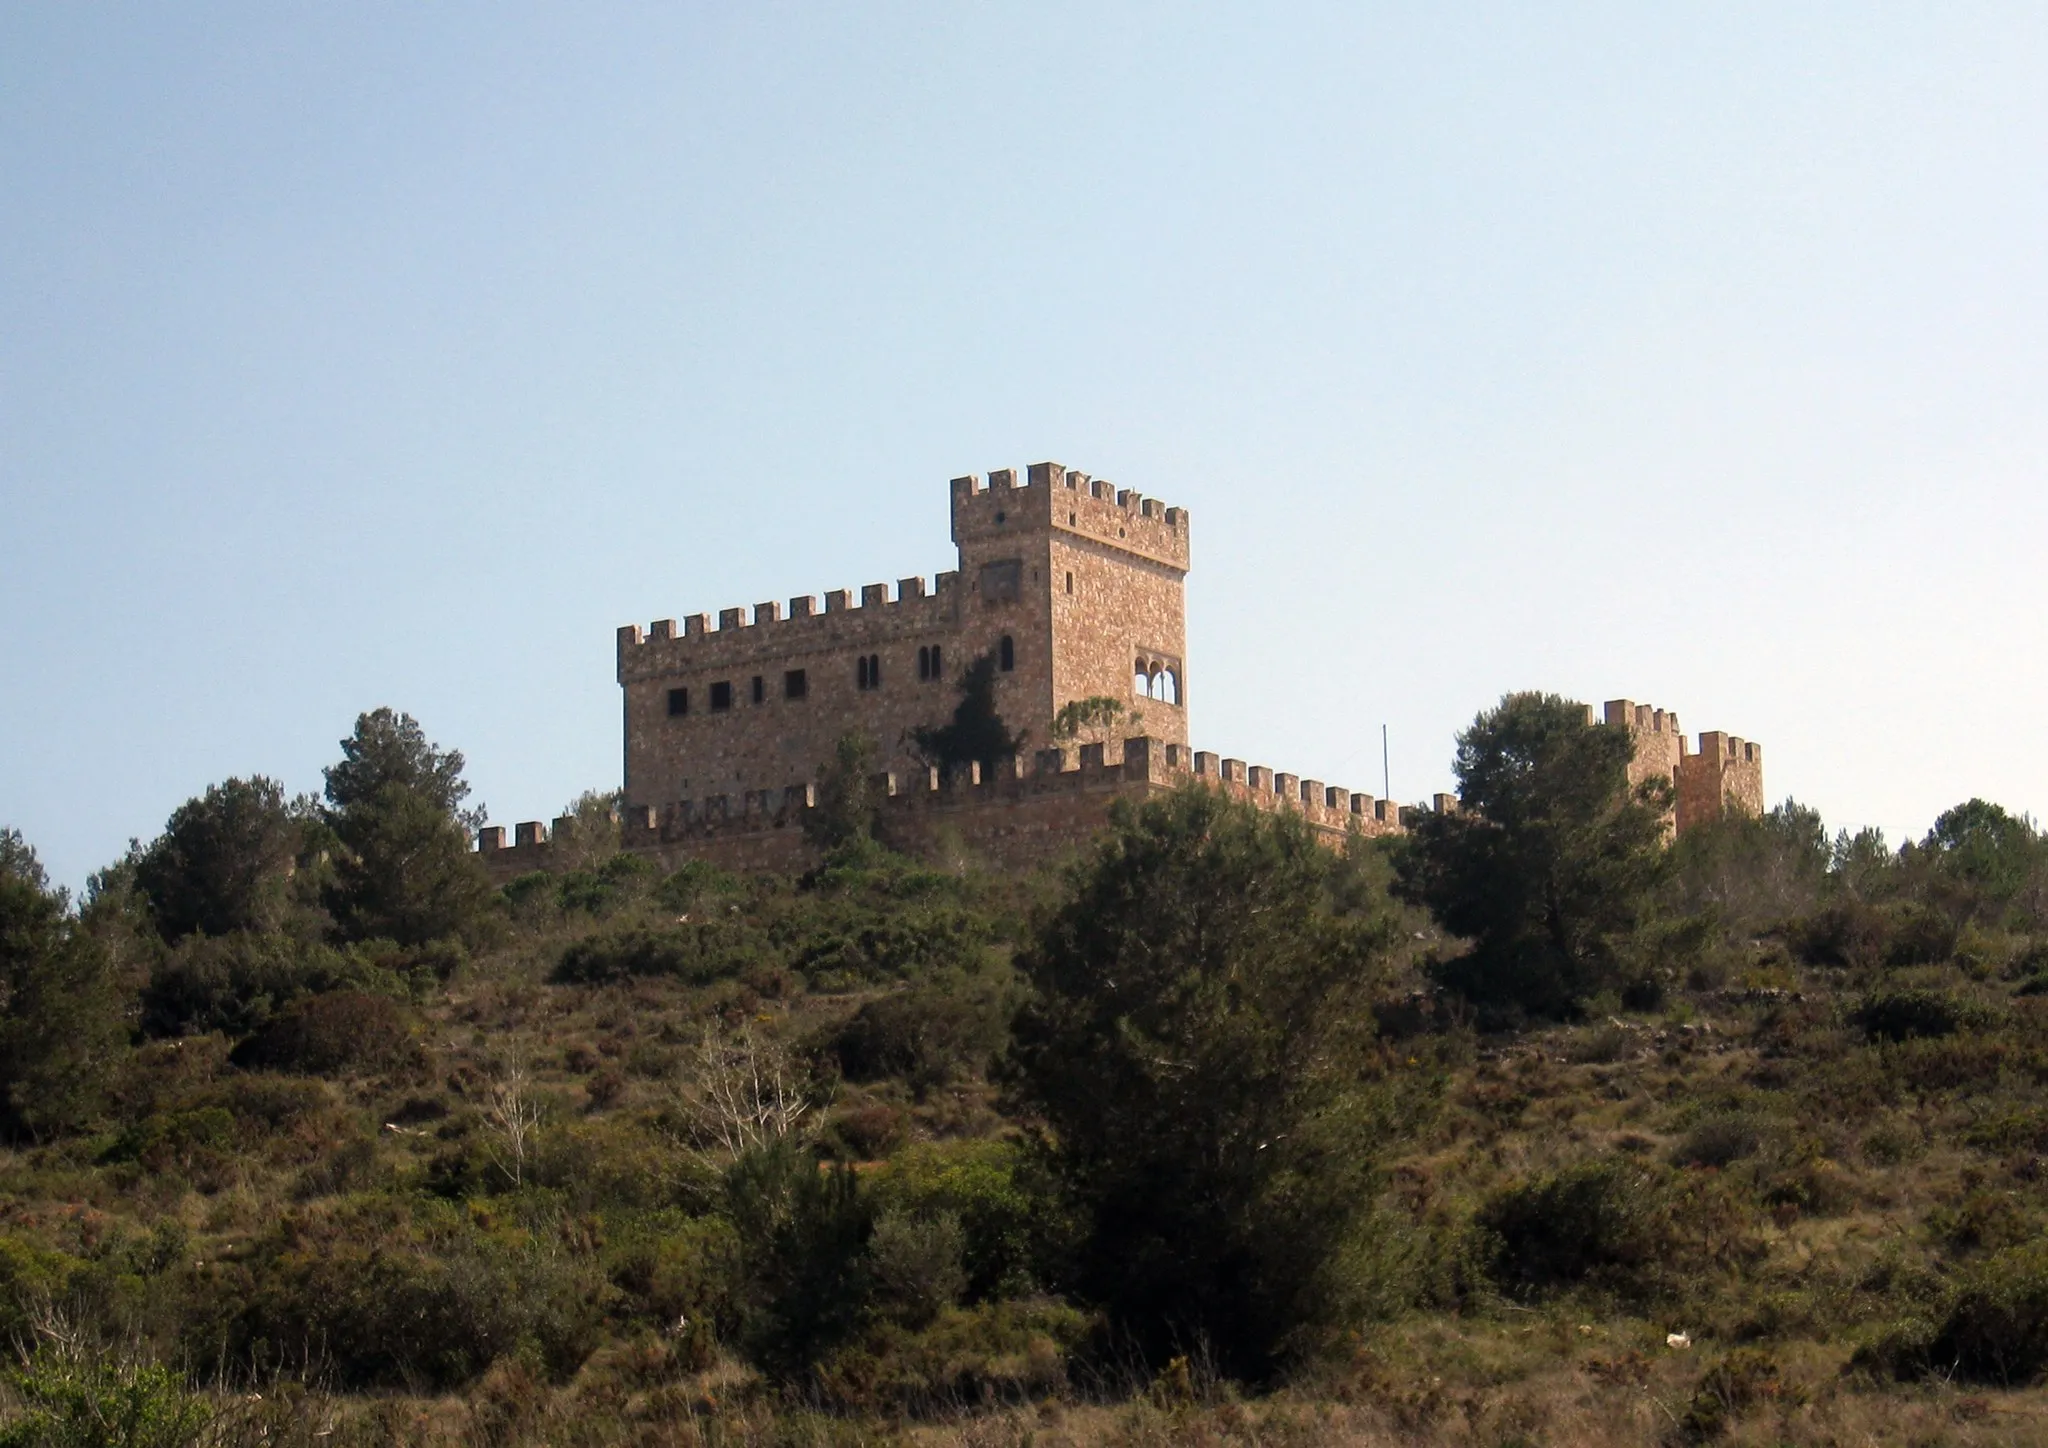 Photo showing: The castle of Masllorenç in the comarca Baix Penedès in Catalonia, Spain.